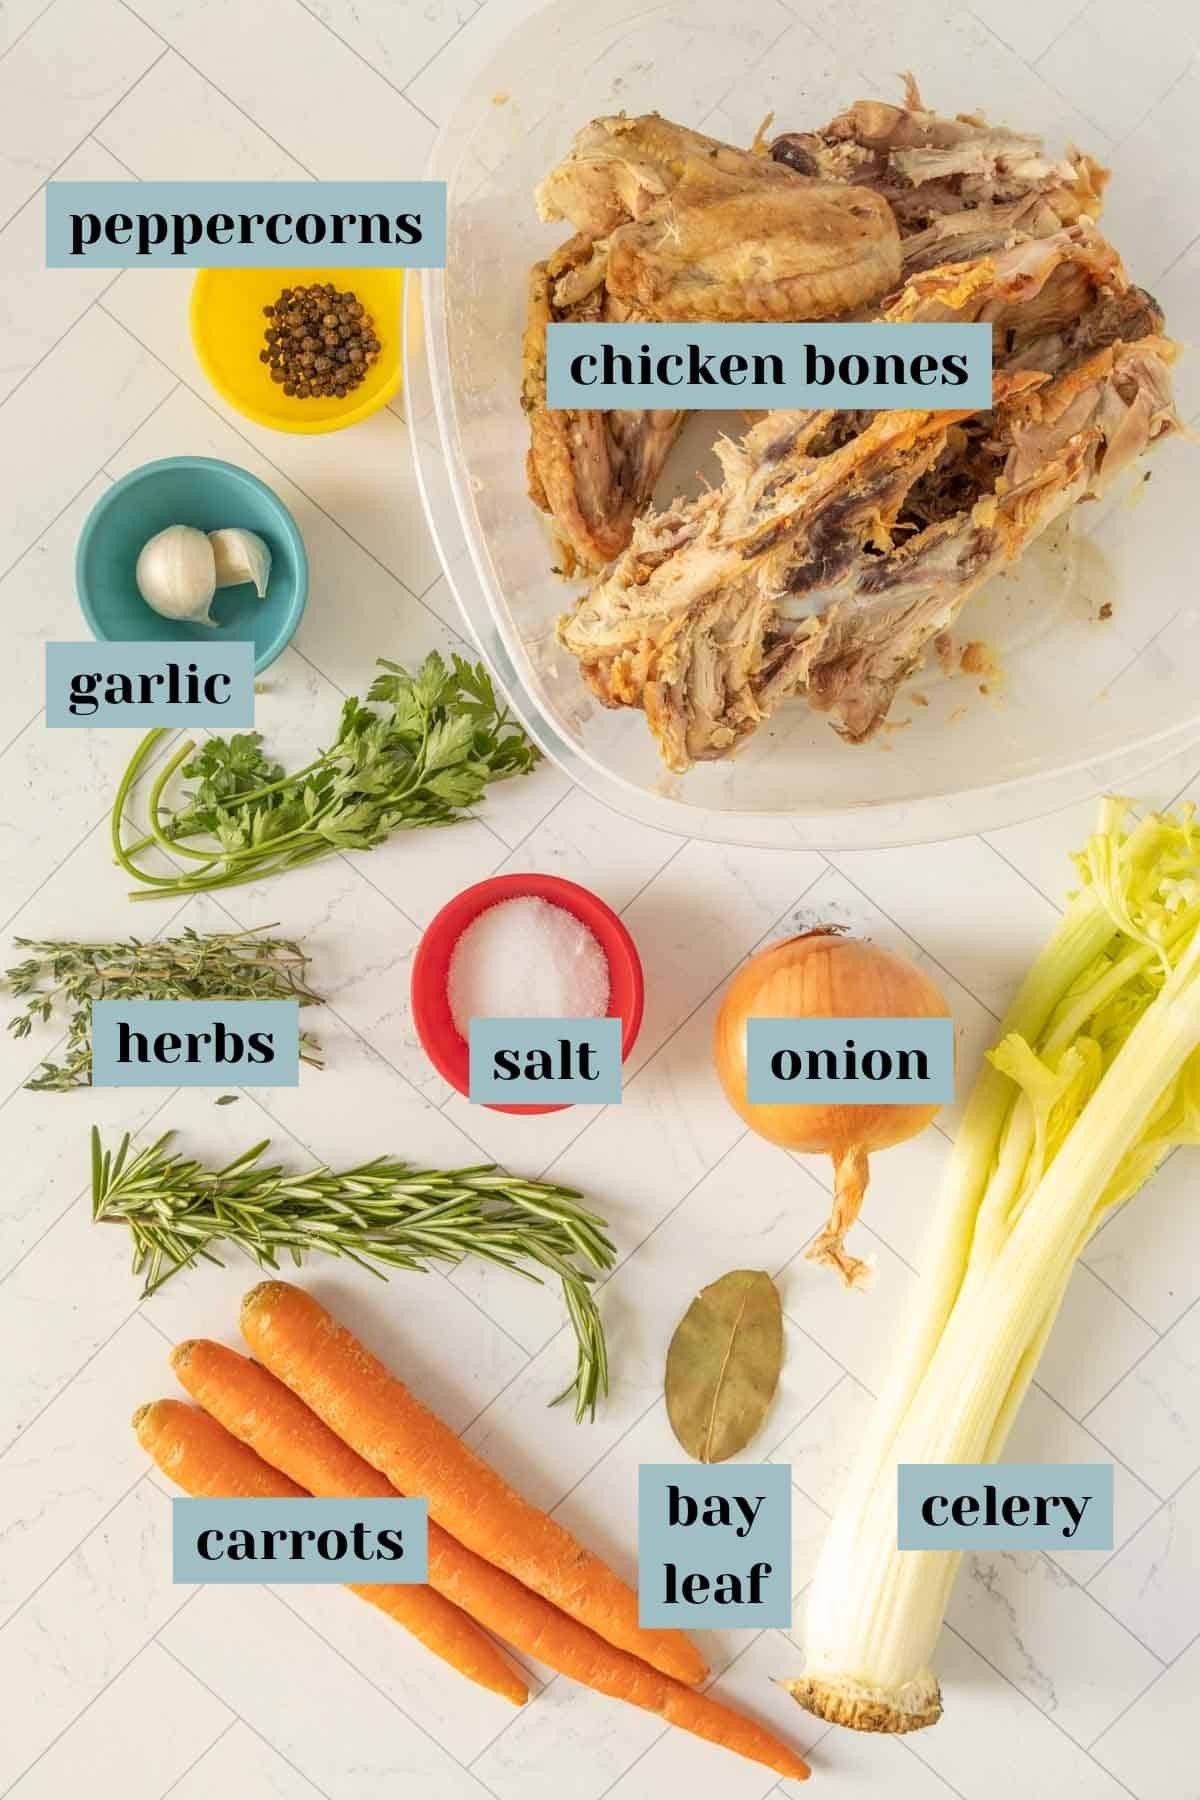 The ingredients for a chicken dish are shown on a white table.